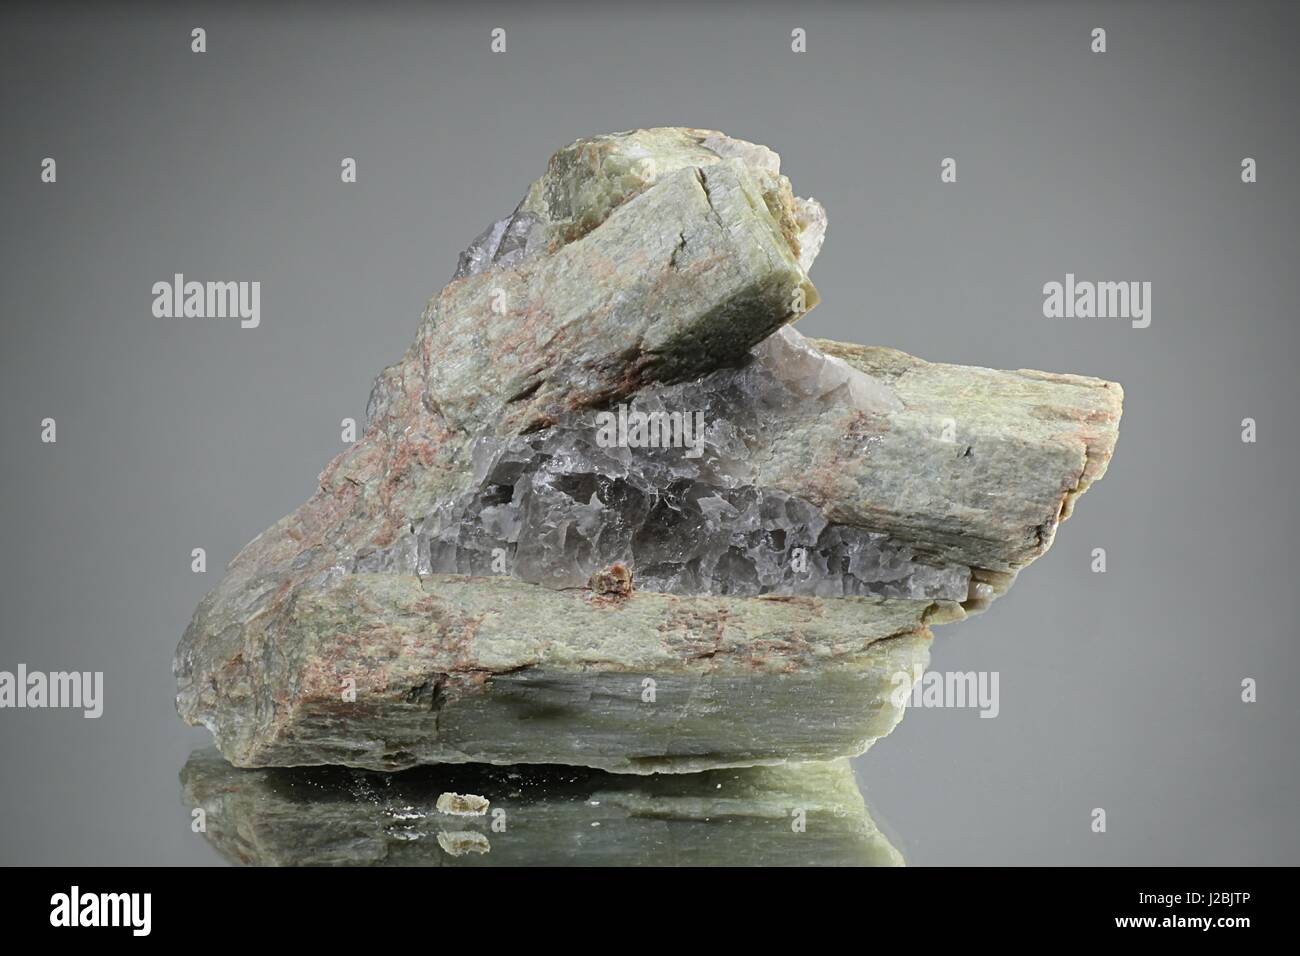 Feldspar crystals of the type anorthite from Mustio quarry, Finland Stock Photo